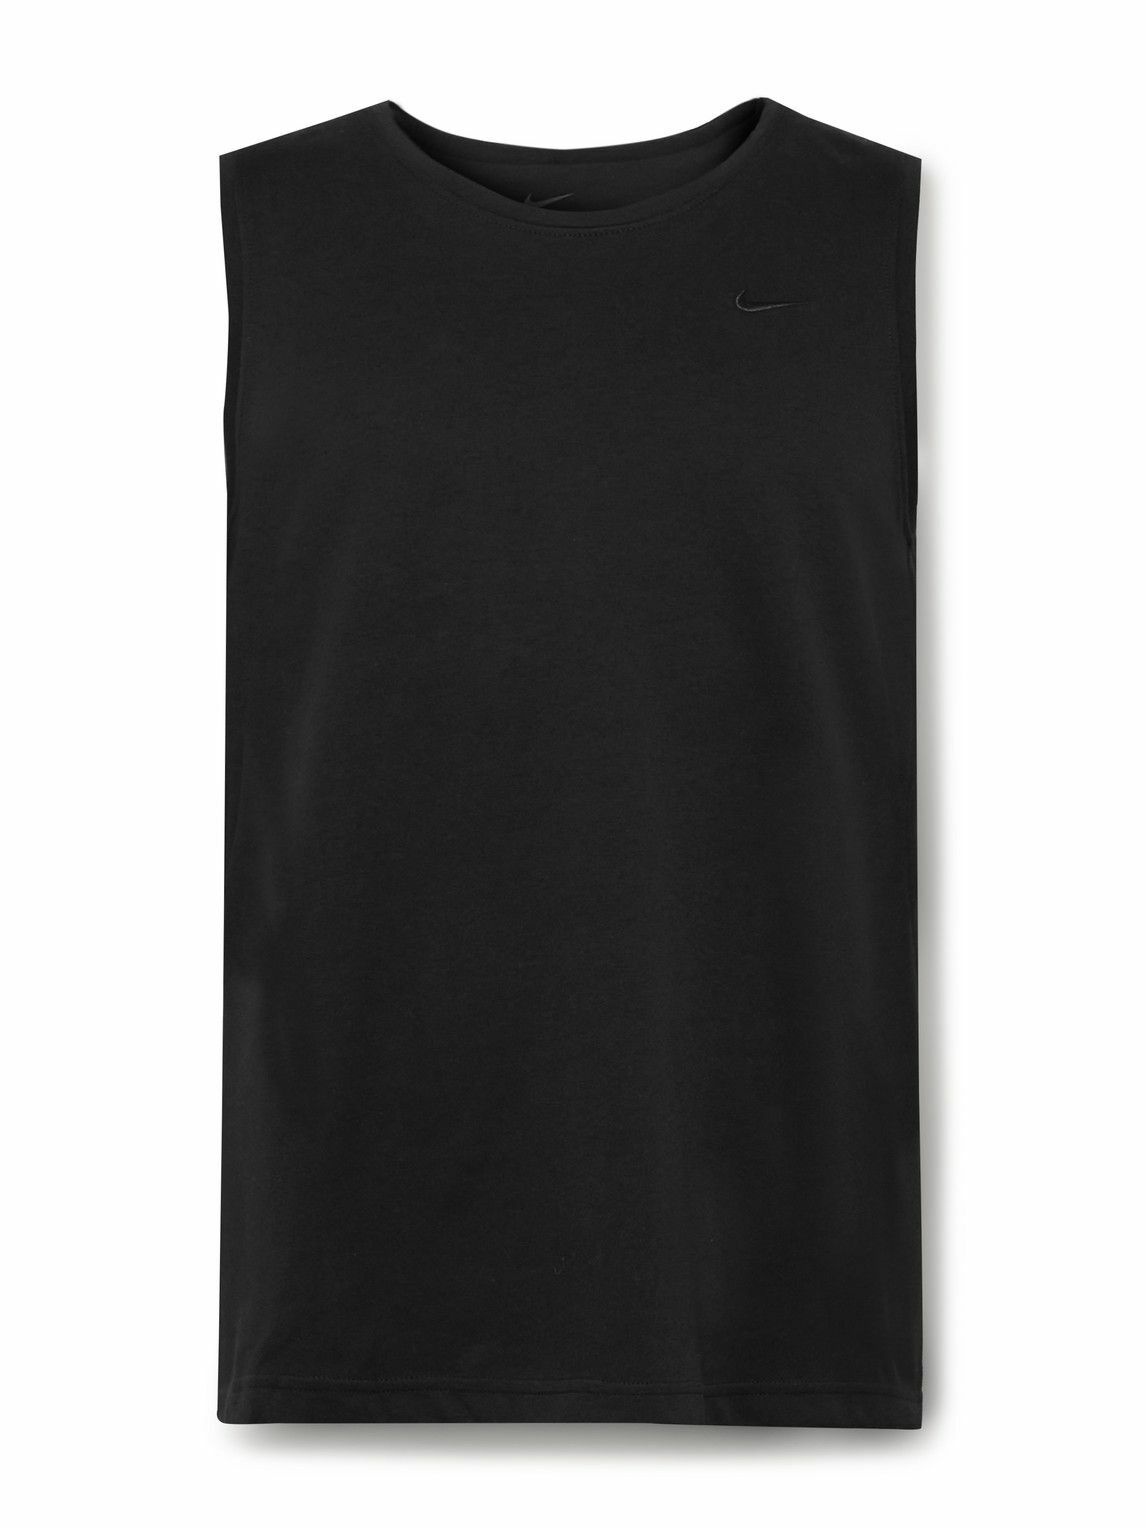 Photo: Nike Training - Primary Logo-Embroidered Cotton-Blend Dri-FIT Tank Top - Black